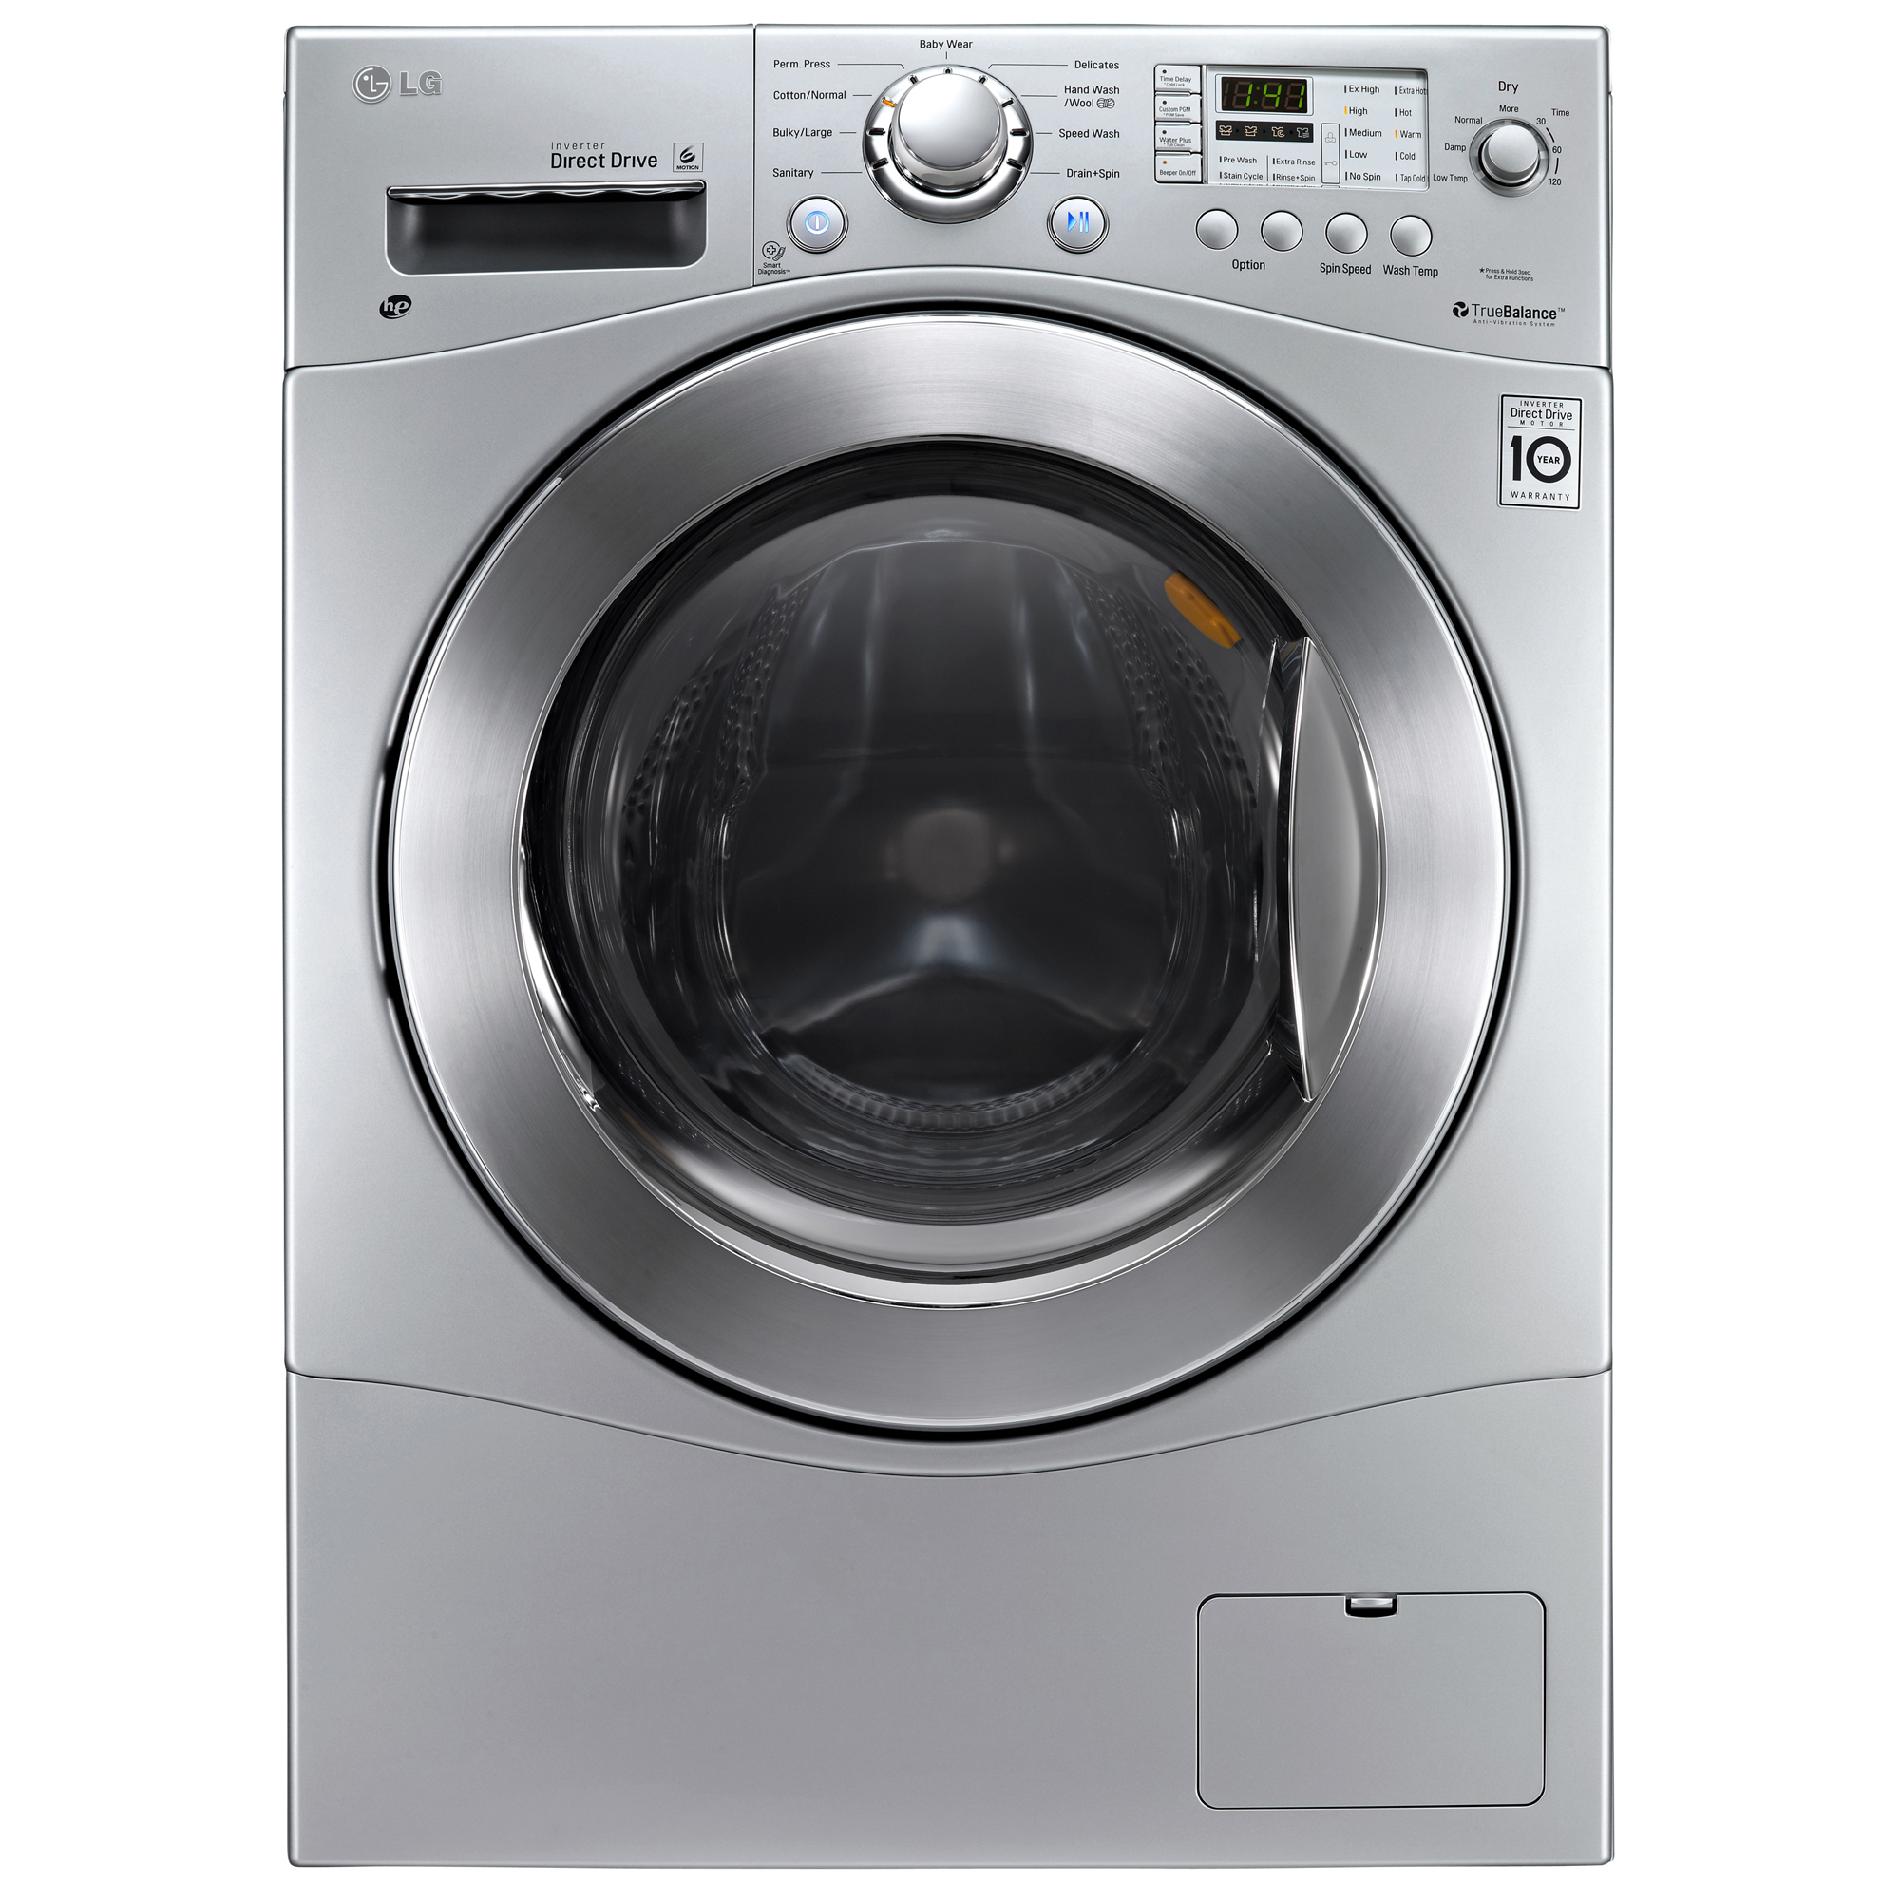 LG WM3499HVA 2.3 cu. ft. Smart WiFi Enabled Compact Front Load Washer & Dryer Combo w/ Steam